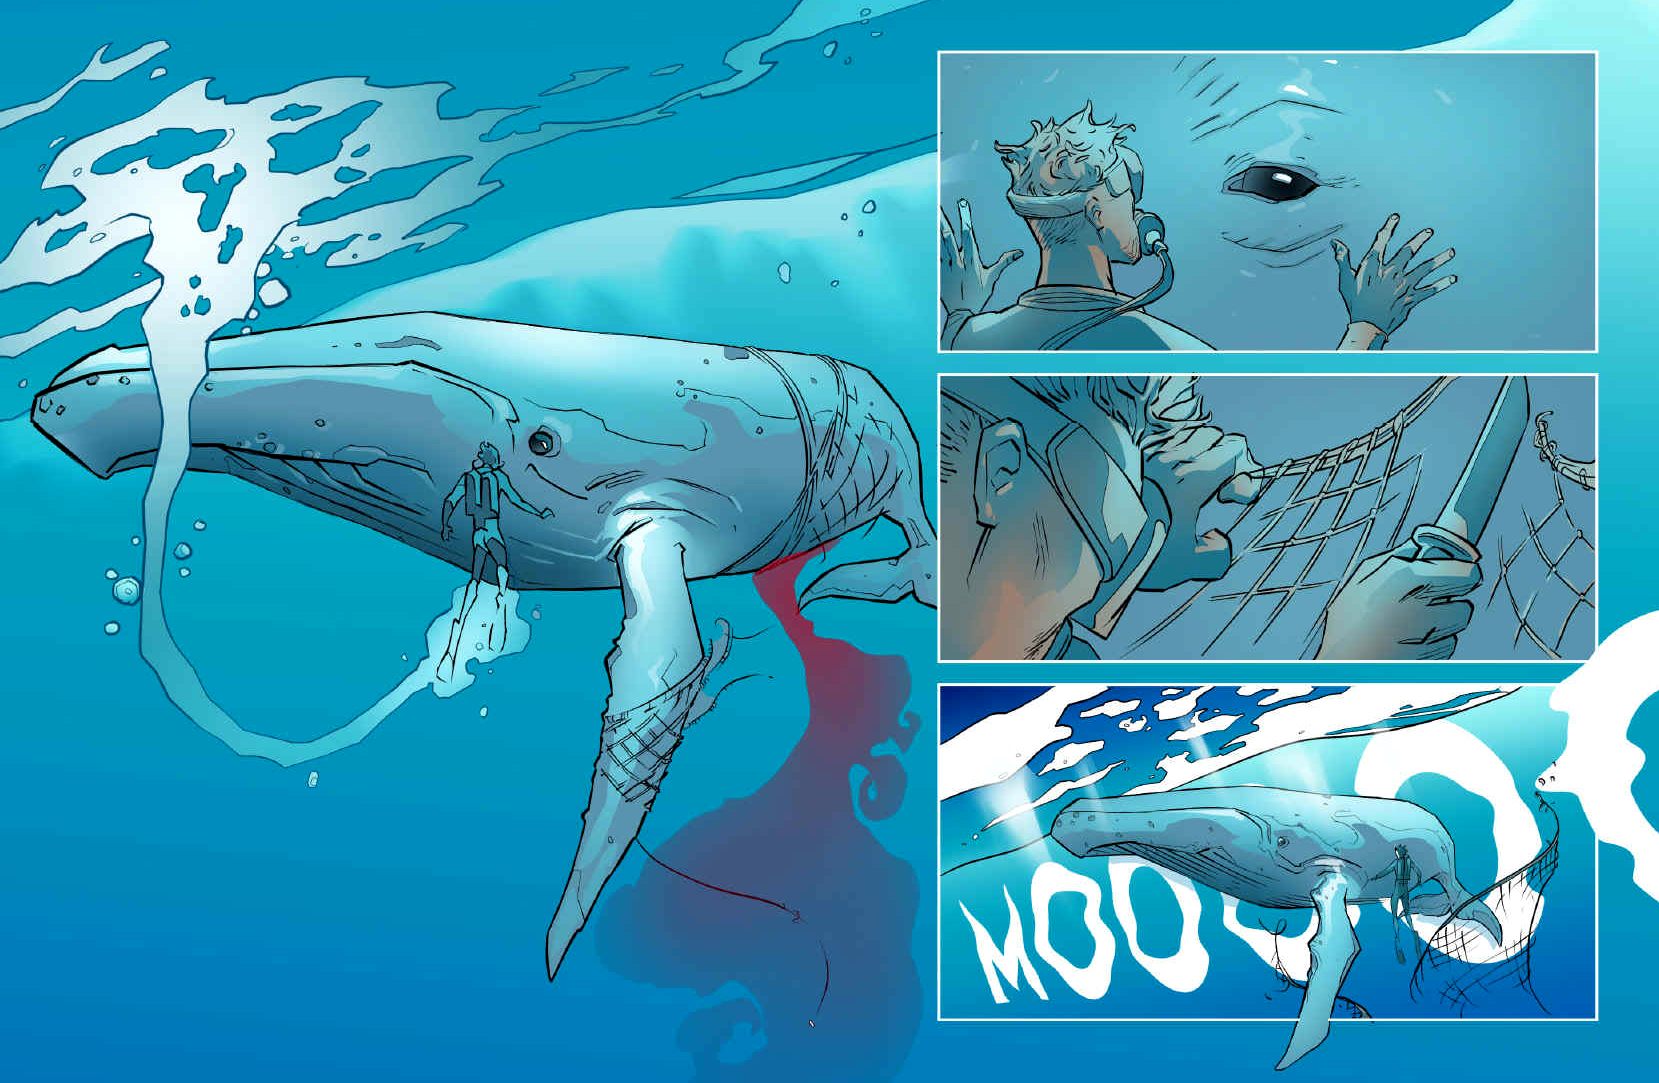 John Storm rescues Kulo Luna, the giant humpback whale from ghost fishing nets